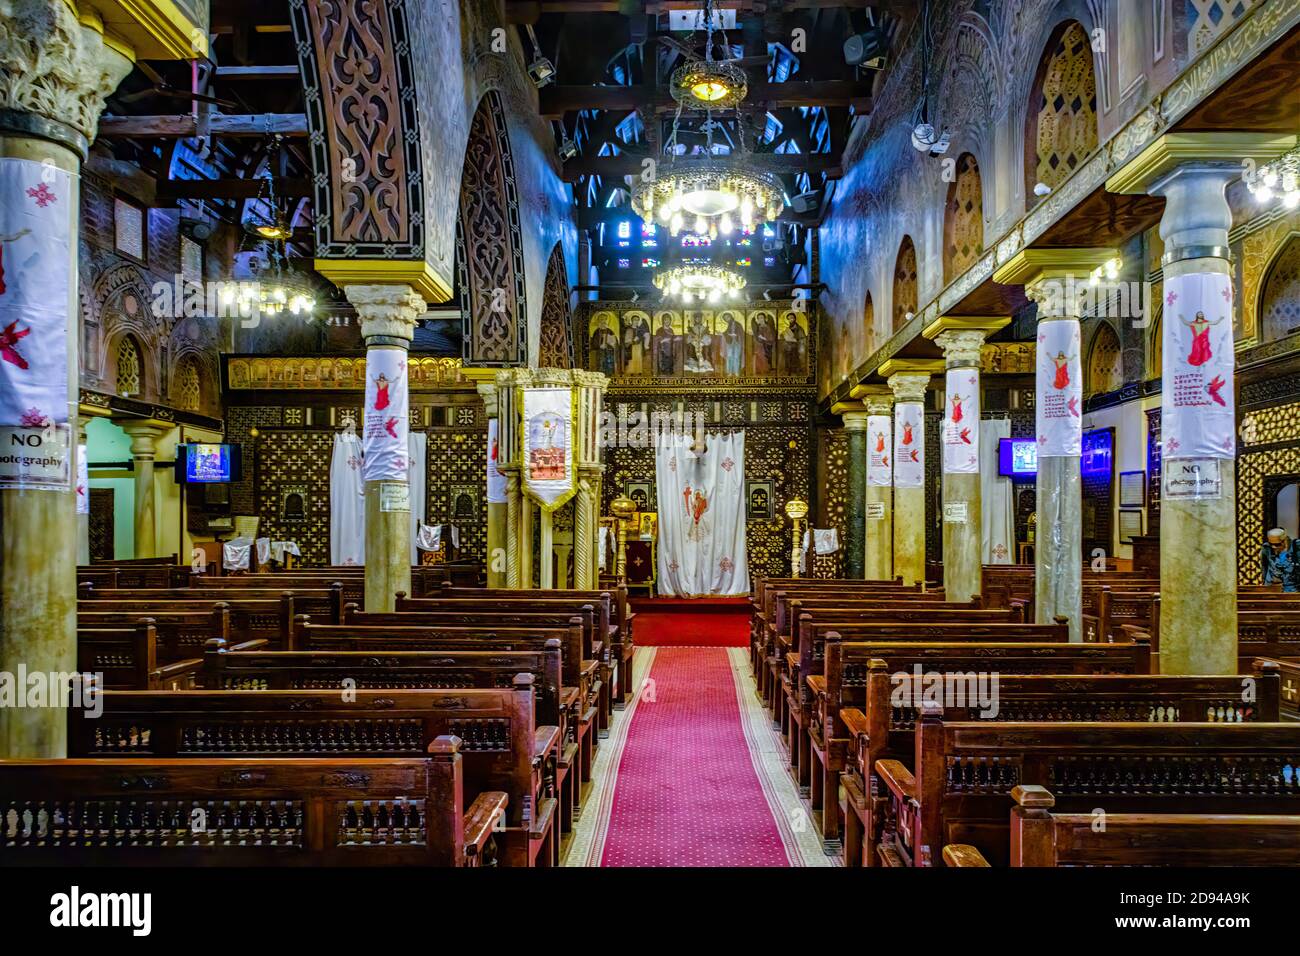 Inside Saint Virgin Mary's Coptic Orthodox Church also known as the Hanging Church in the Coptic district of Cairo, Egypt Stock Photo